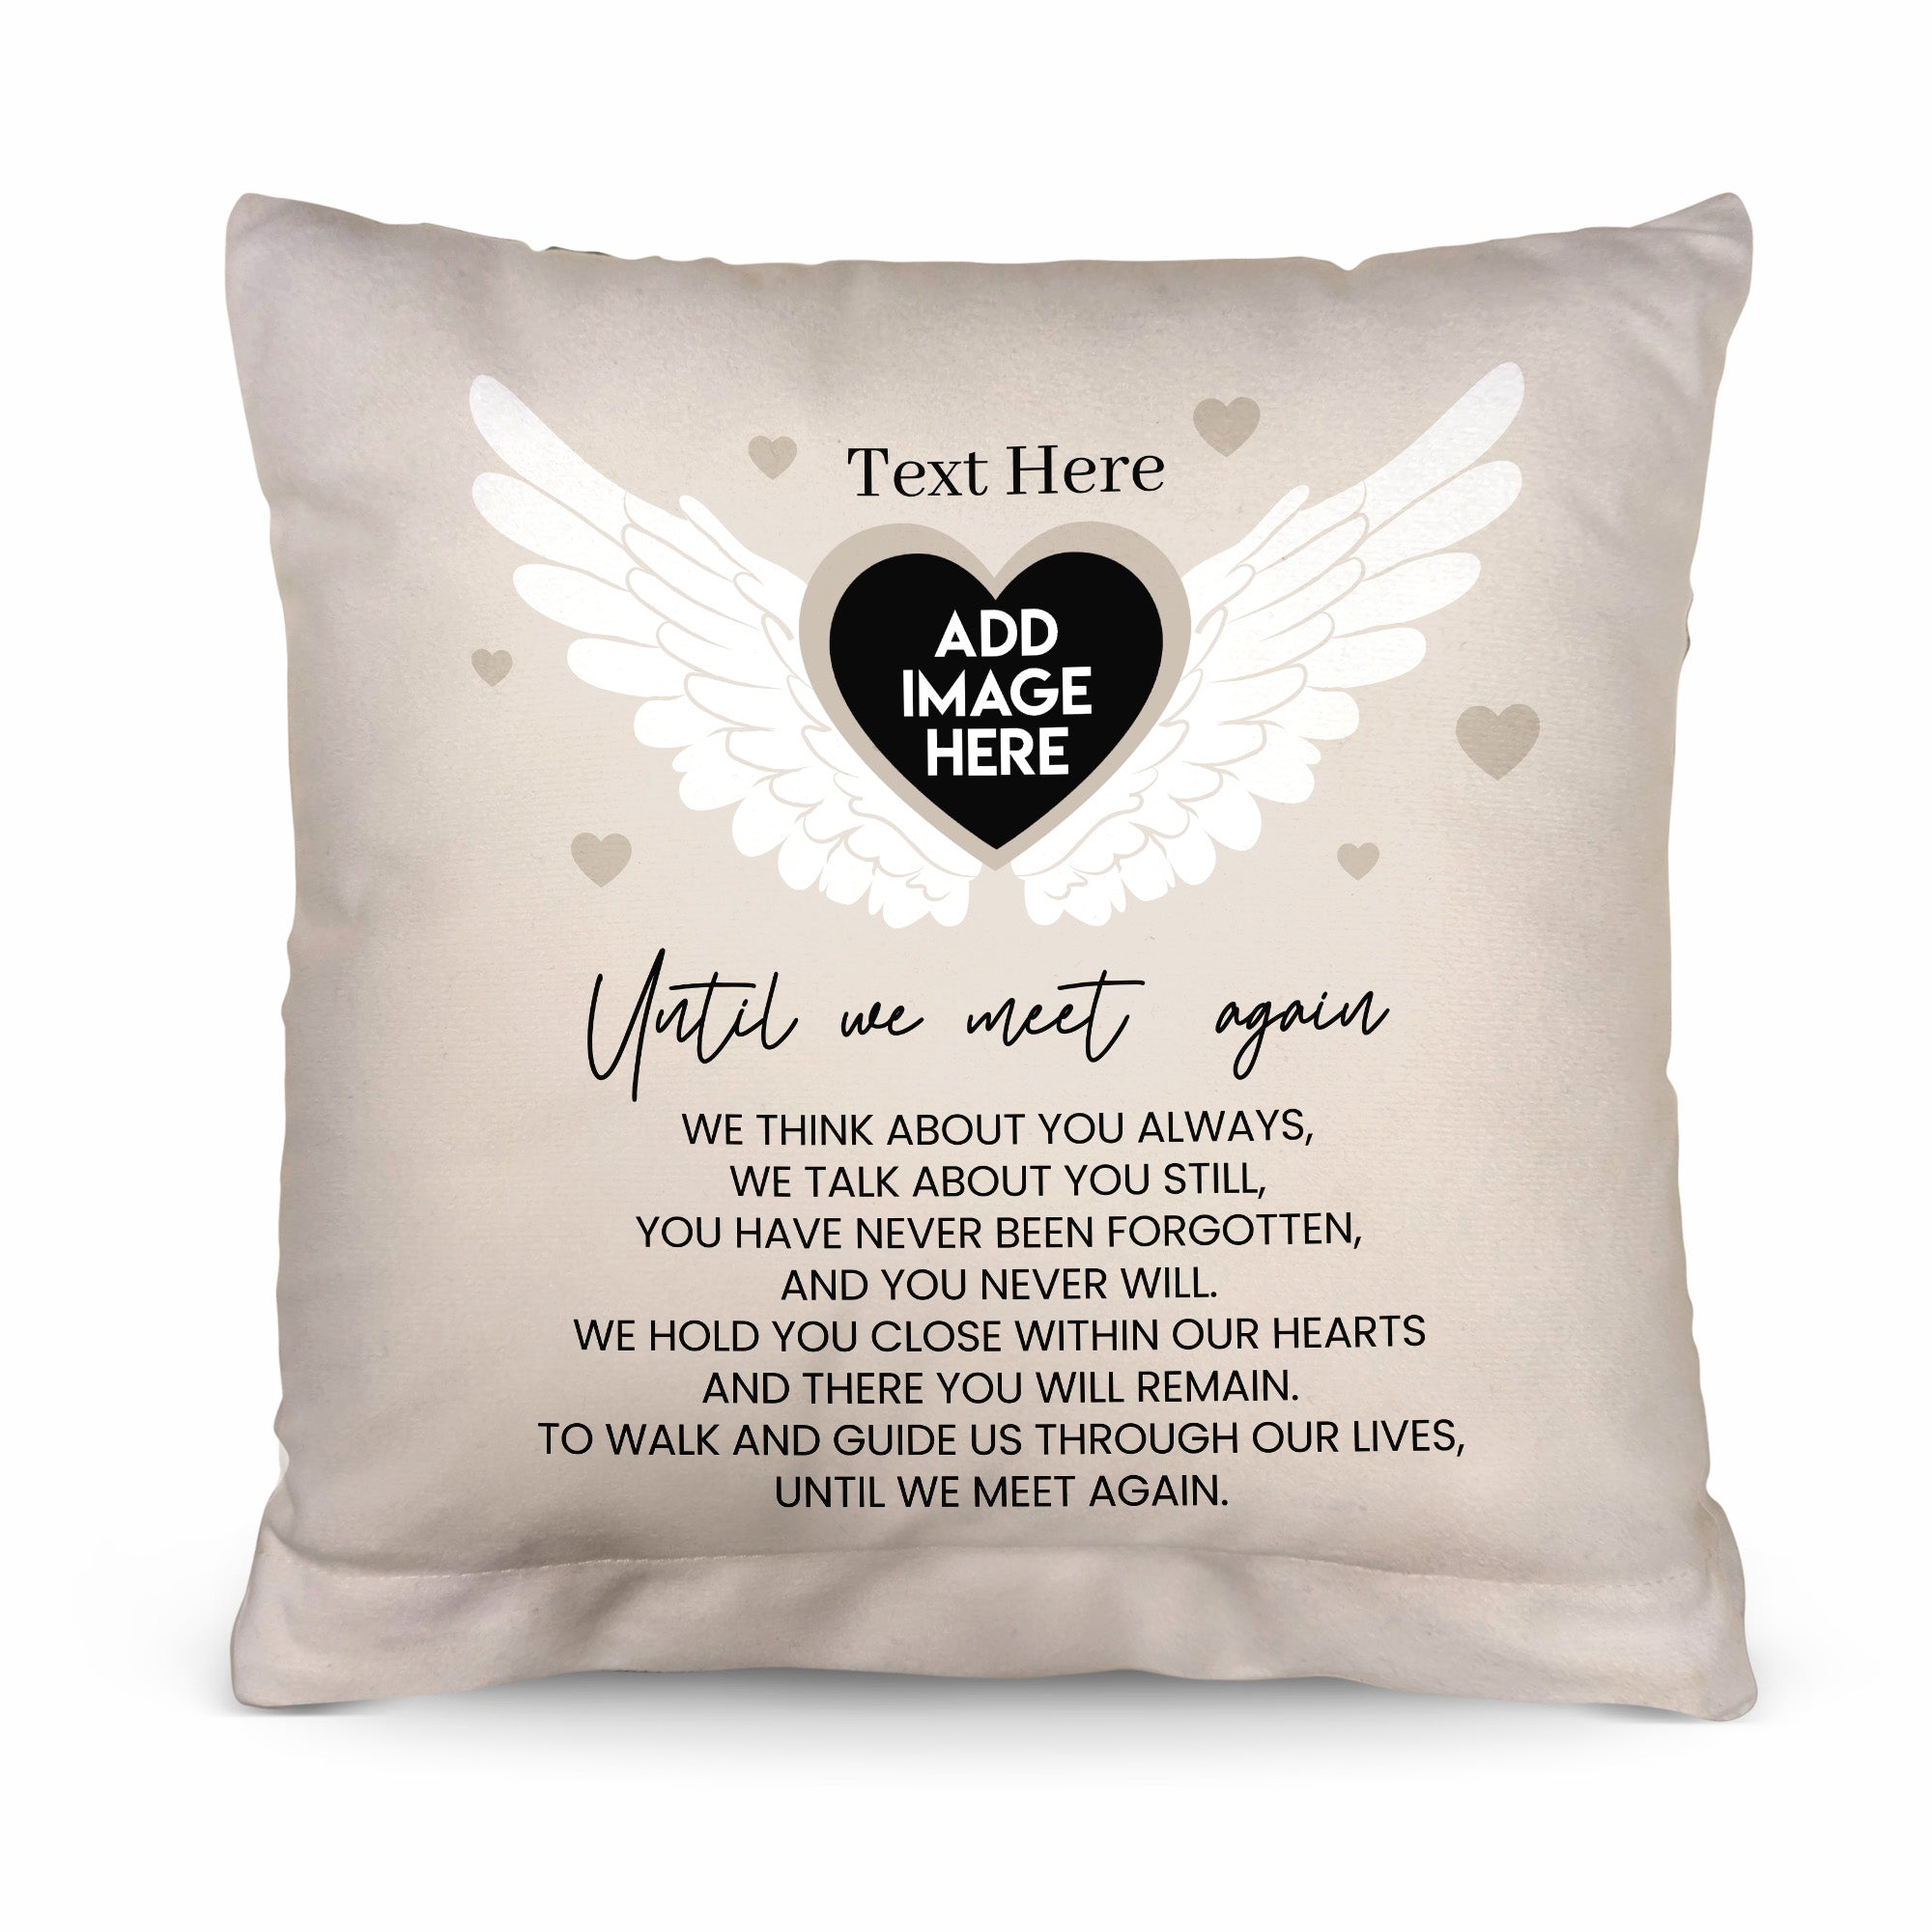 Until We Meet Again - Personalised Memory Cushion - Two Sizes